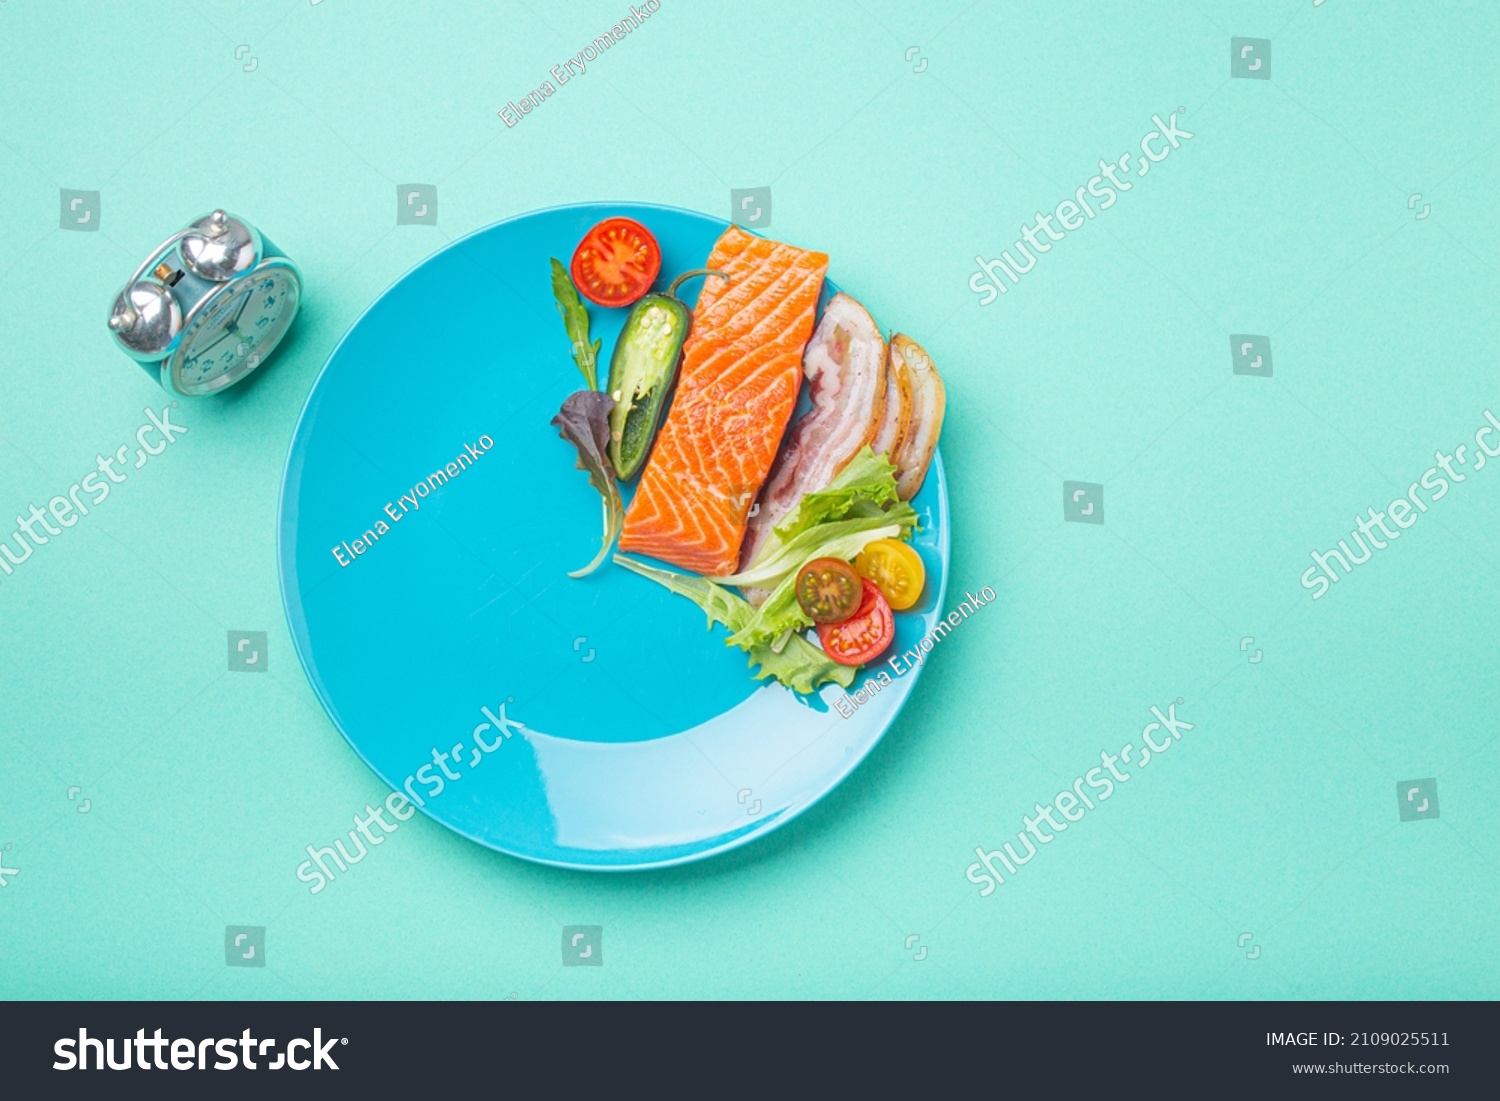 Intermittent fasting low carb hight fats diet concept flat lay, healthy food salmon fish, bacon meat, vegetables and salad on blue plate and clock alarm on blue background top view, space for text #2109025511